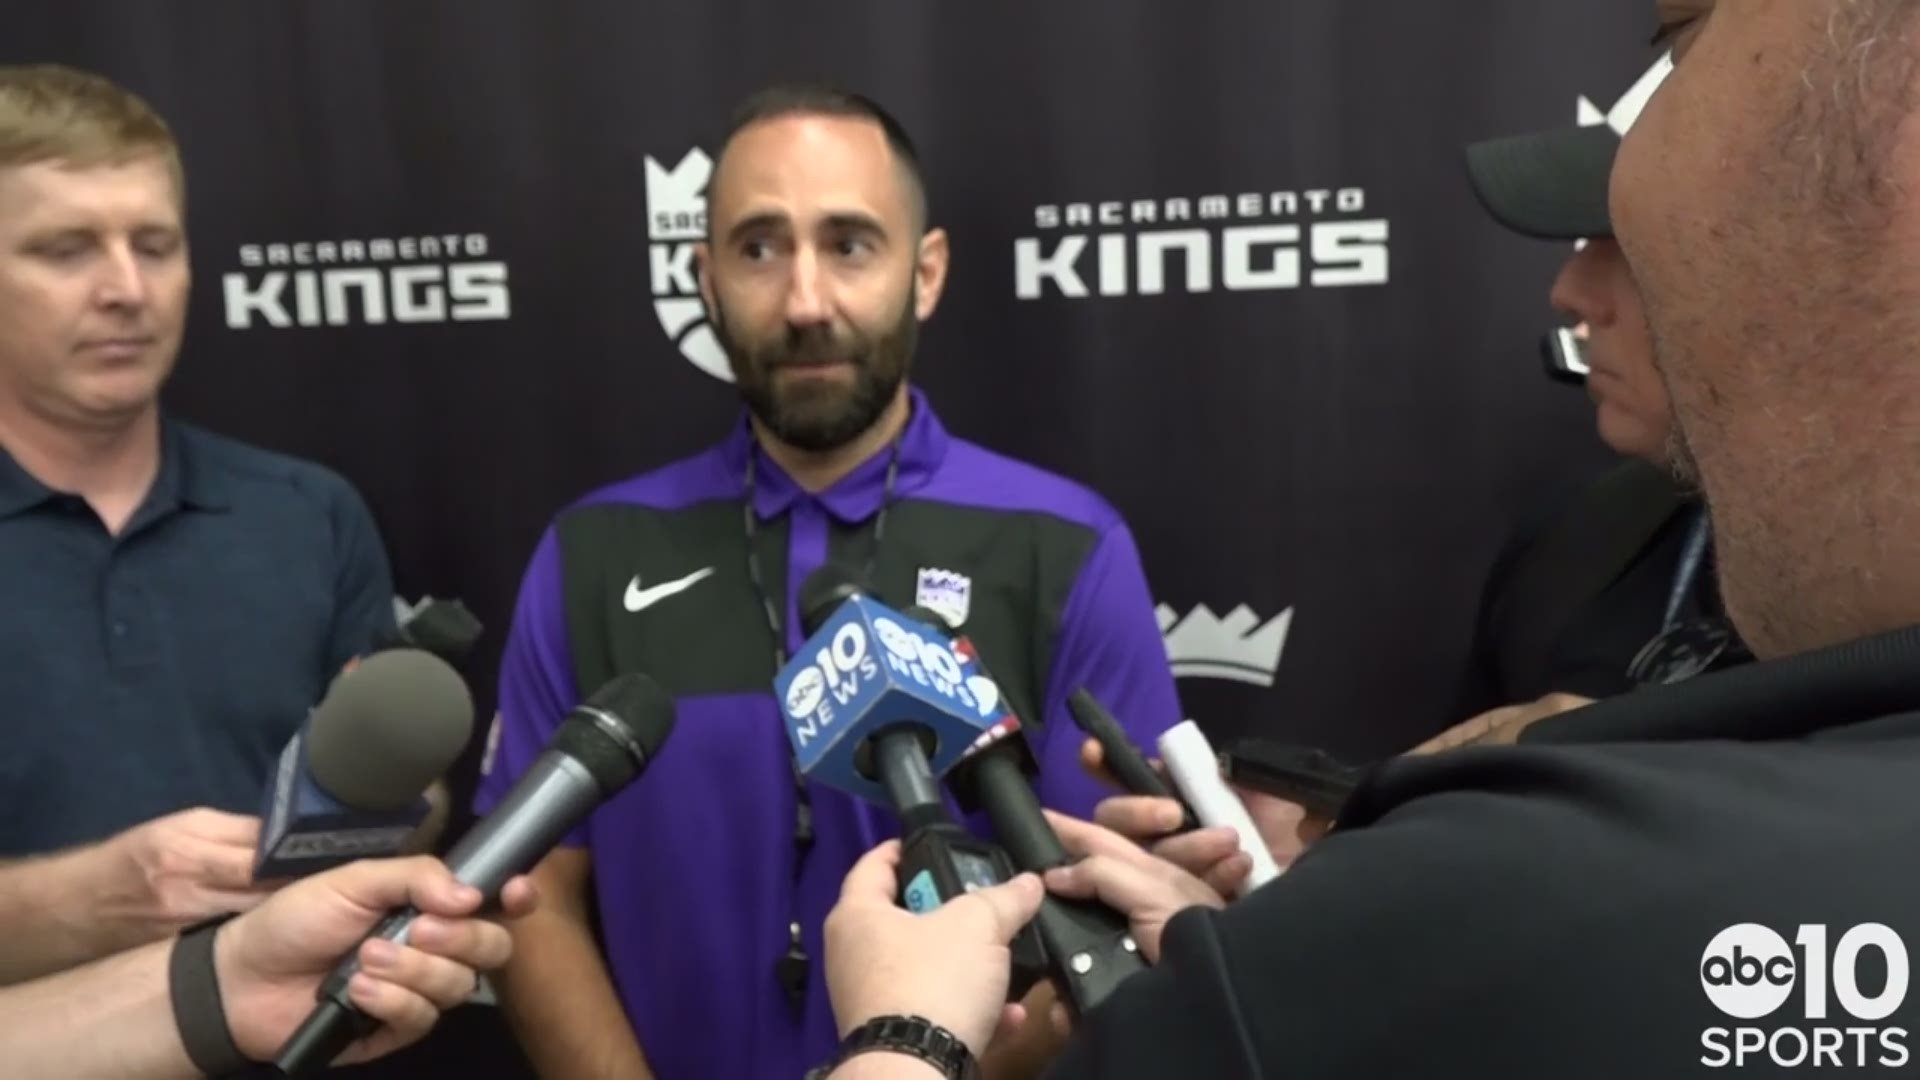 Sacramento Kings Summer League 2023 Schedule, Roster, Results for  California Classic and Las Vegas